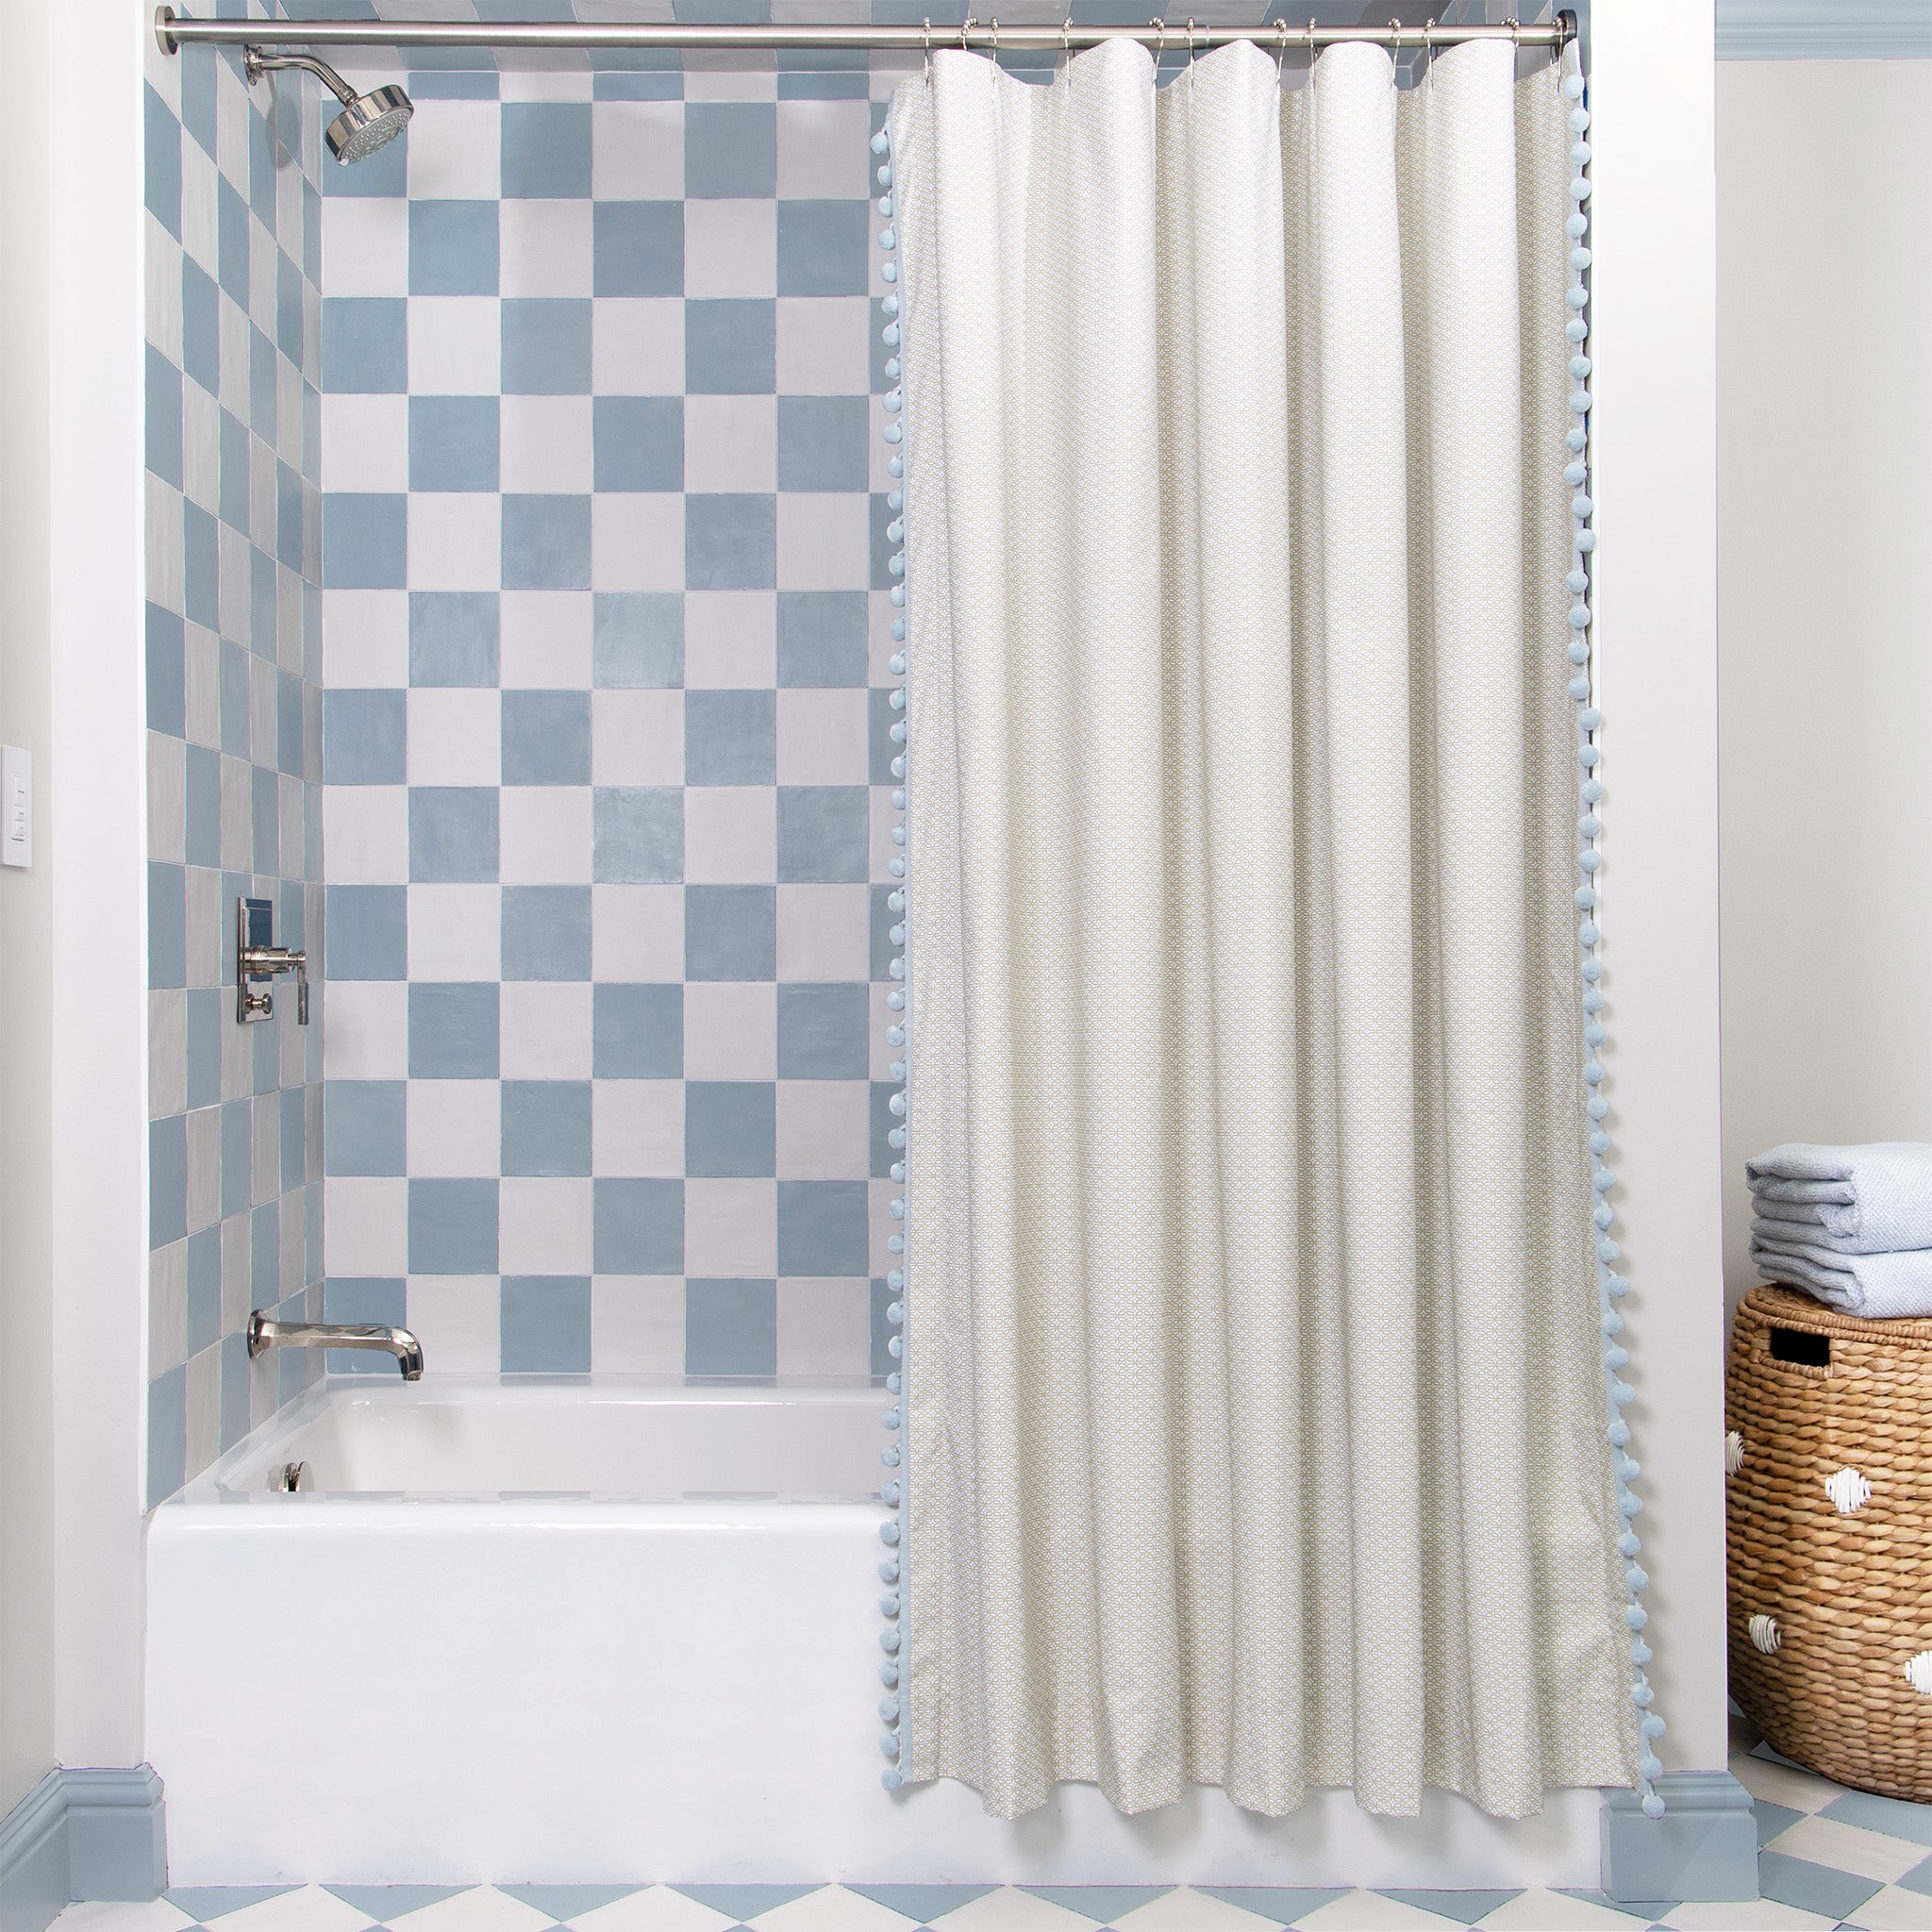 Moss Green Geometric Printed shower curtain hanging on rod in front of white tub in bathroom with blue and white tiles